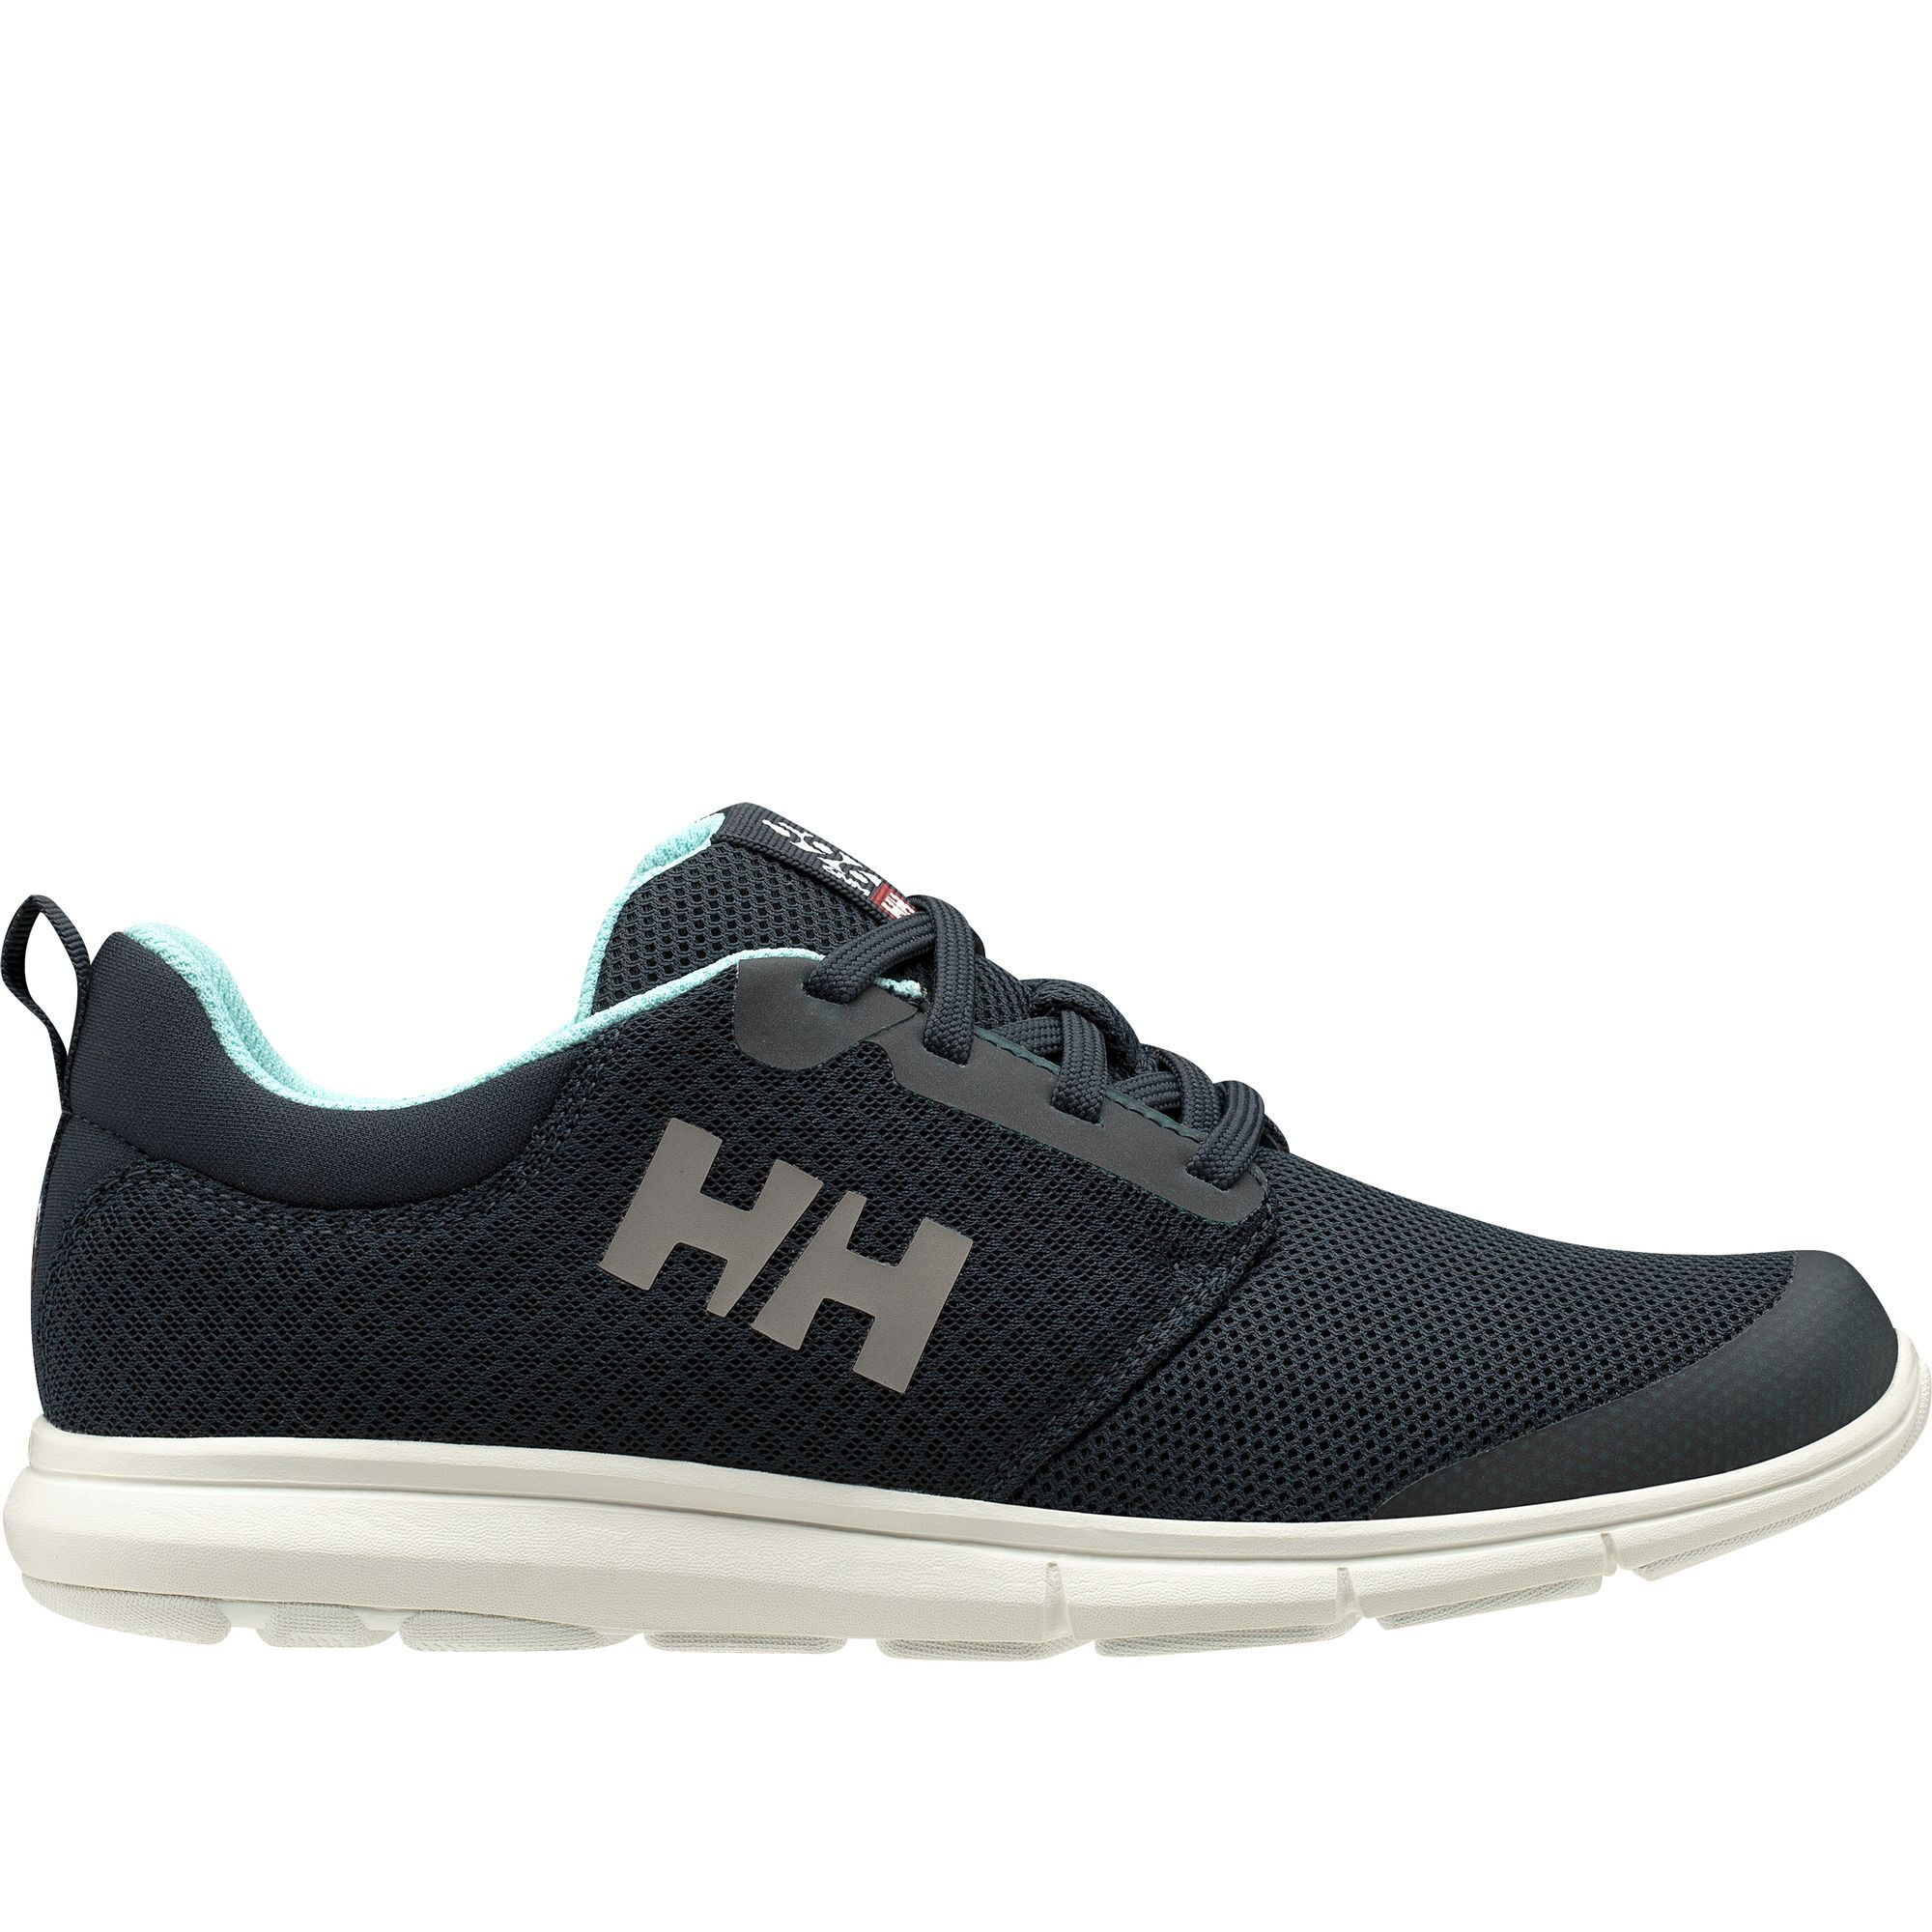 Helly Hansen Feathering - Sailing shoes - Women's | Hardloop